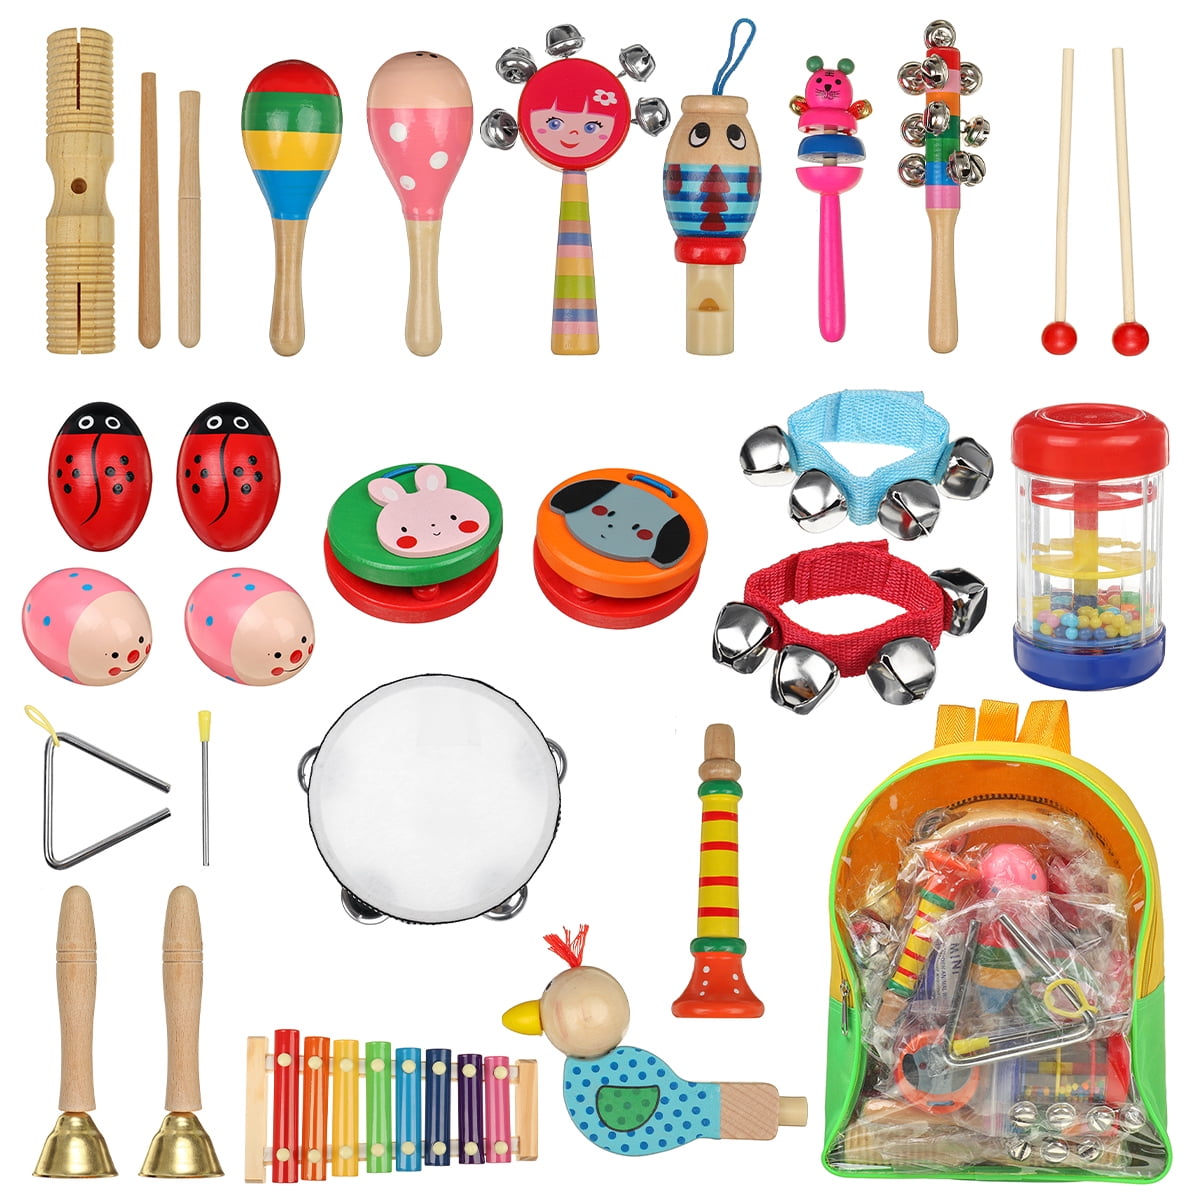 Details about   LOOIKOOS Toddler Musical Instruments Natural Wooden Percussion Toy For Kids Toys 